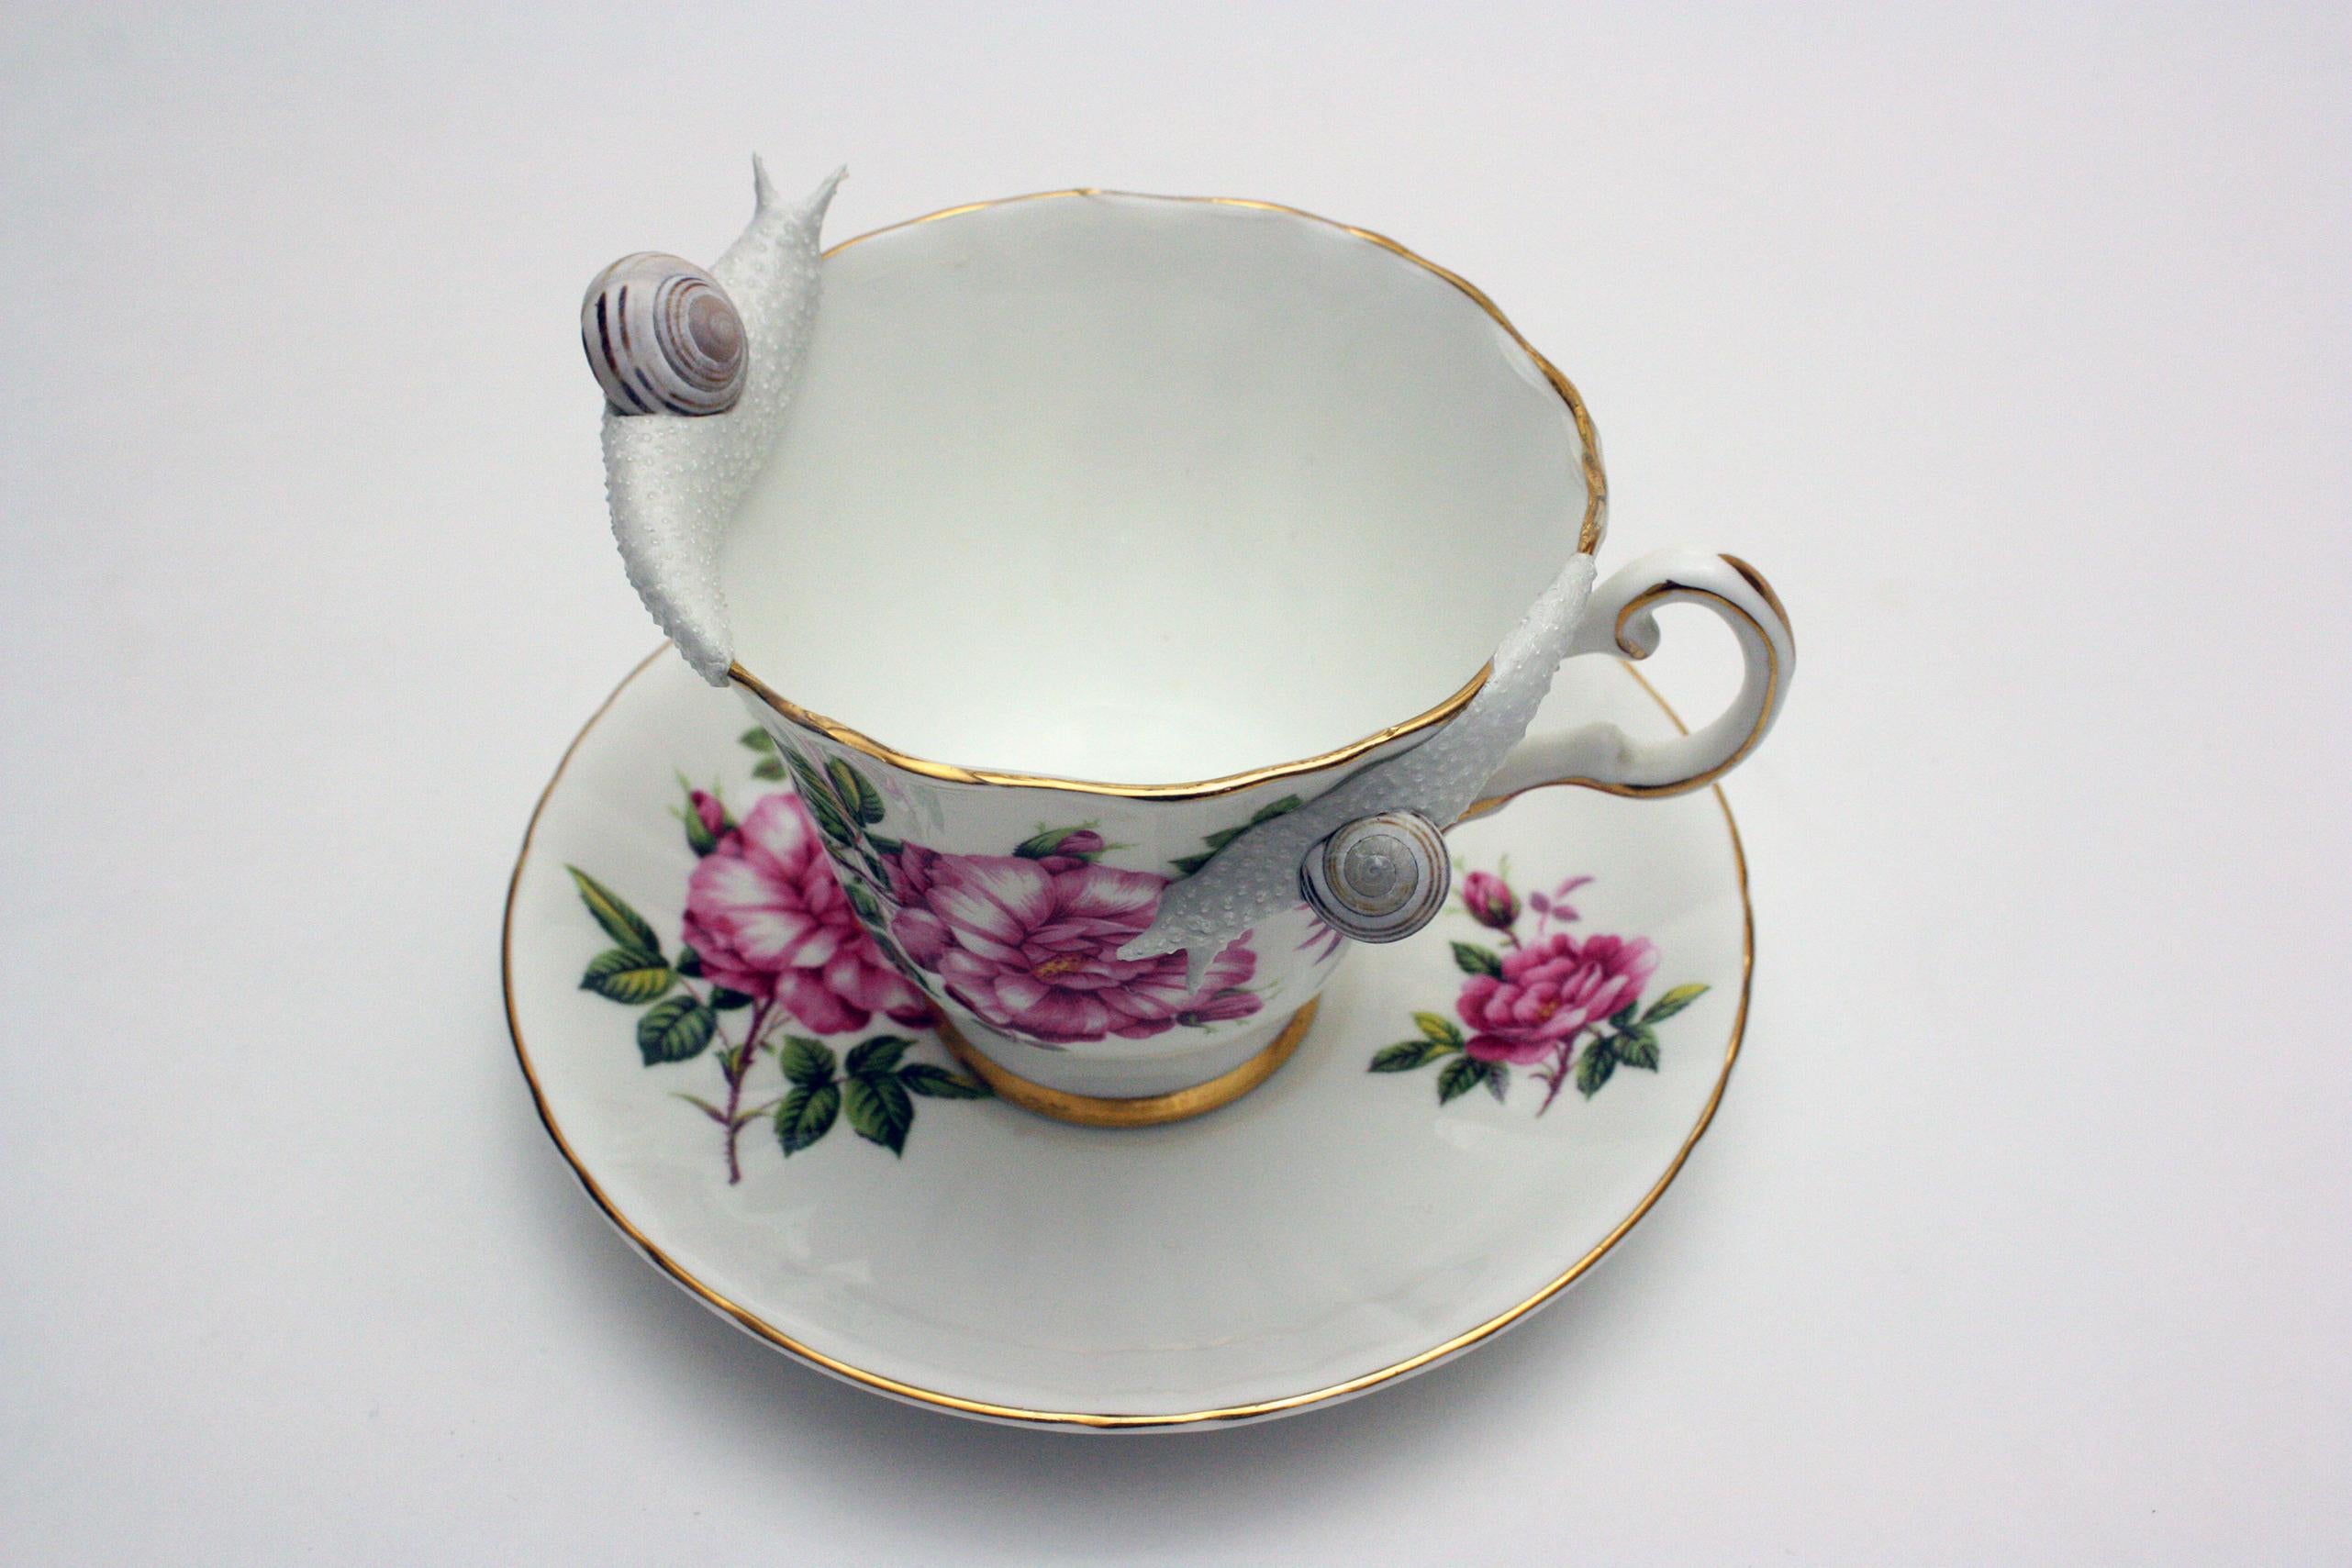 Snails on a Pink Floral Teacup "Traversing Painted Flowers 3" by Bethany Krull